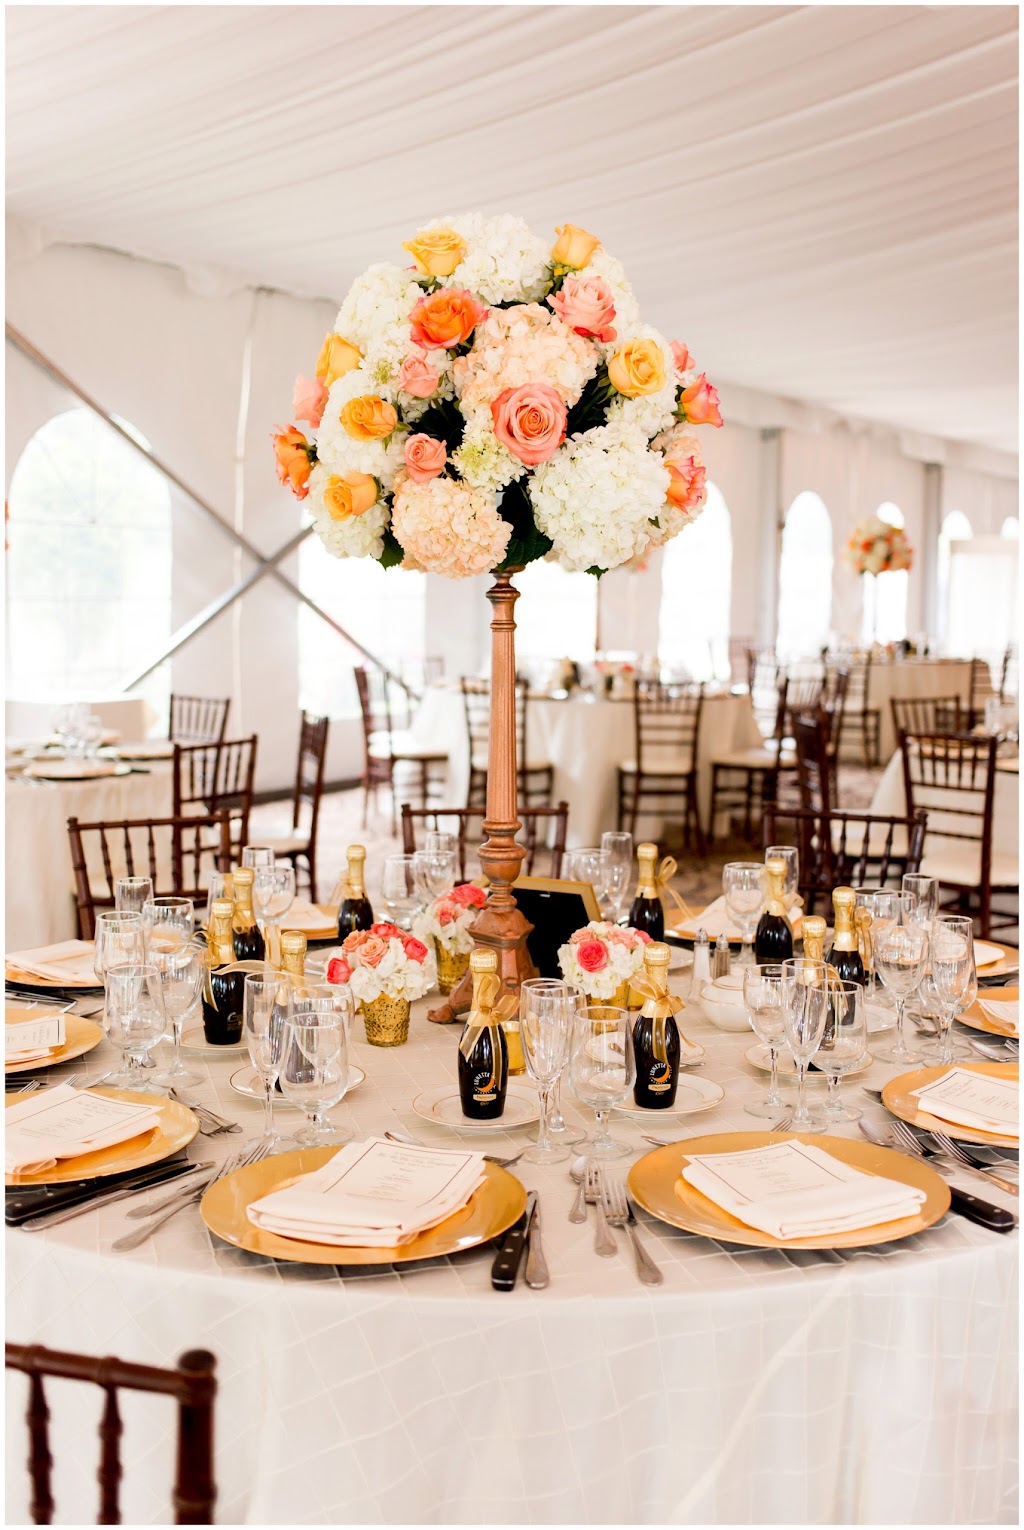 Floral Cottage Weddings & Events | 84 Stefanyk Rd, Glen Spey, NY 12737 | Phone: (845) 469-4020